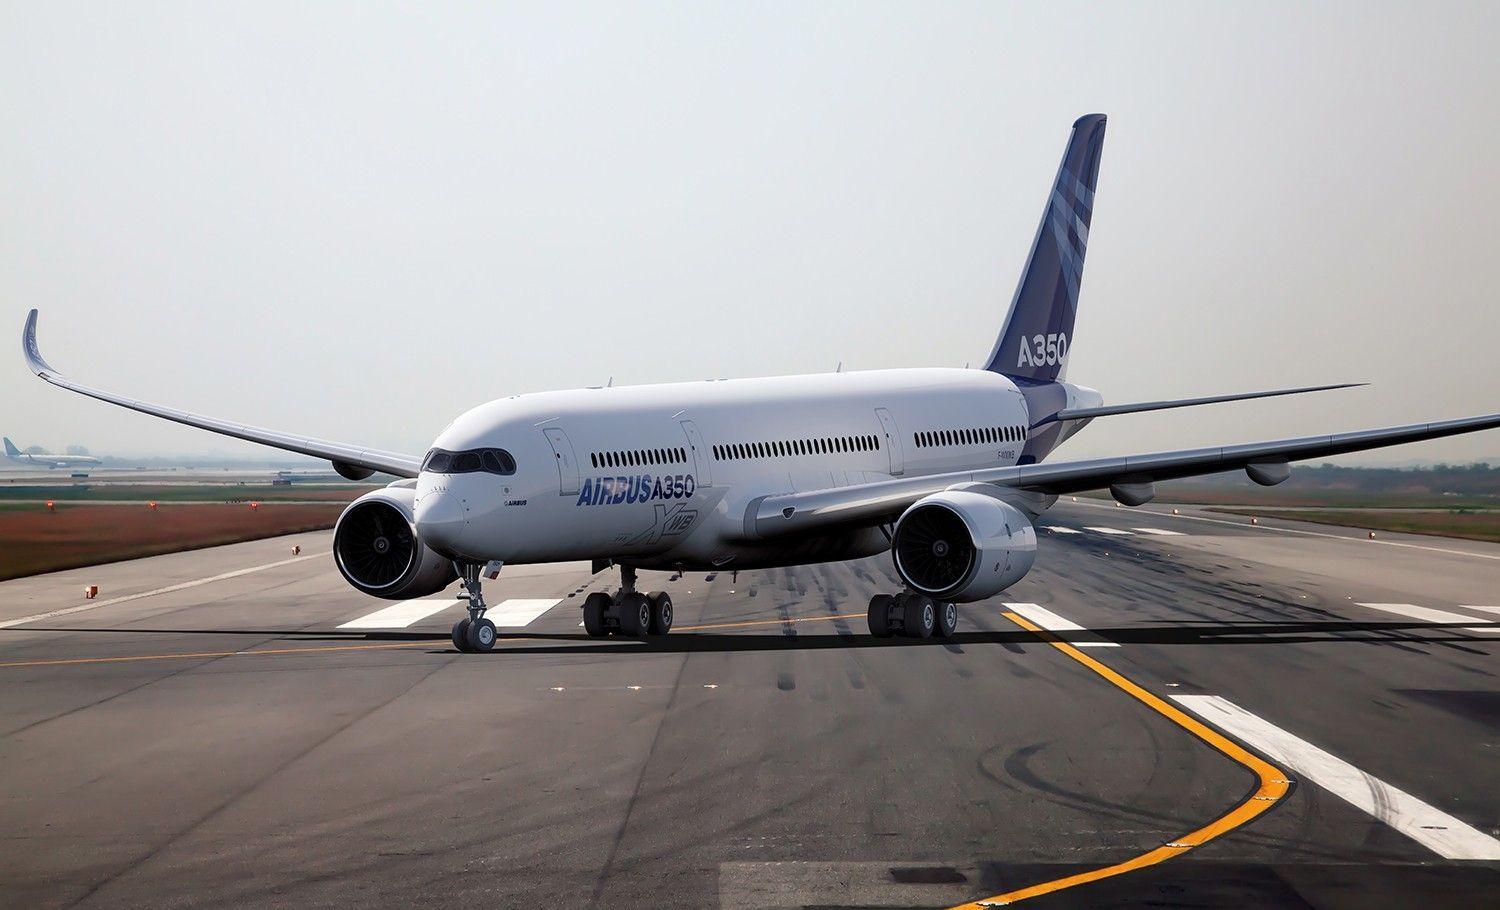 airbus a350 xwb is newest variant of wide body aircraft of airbus